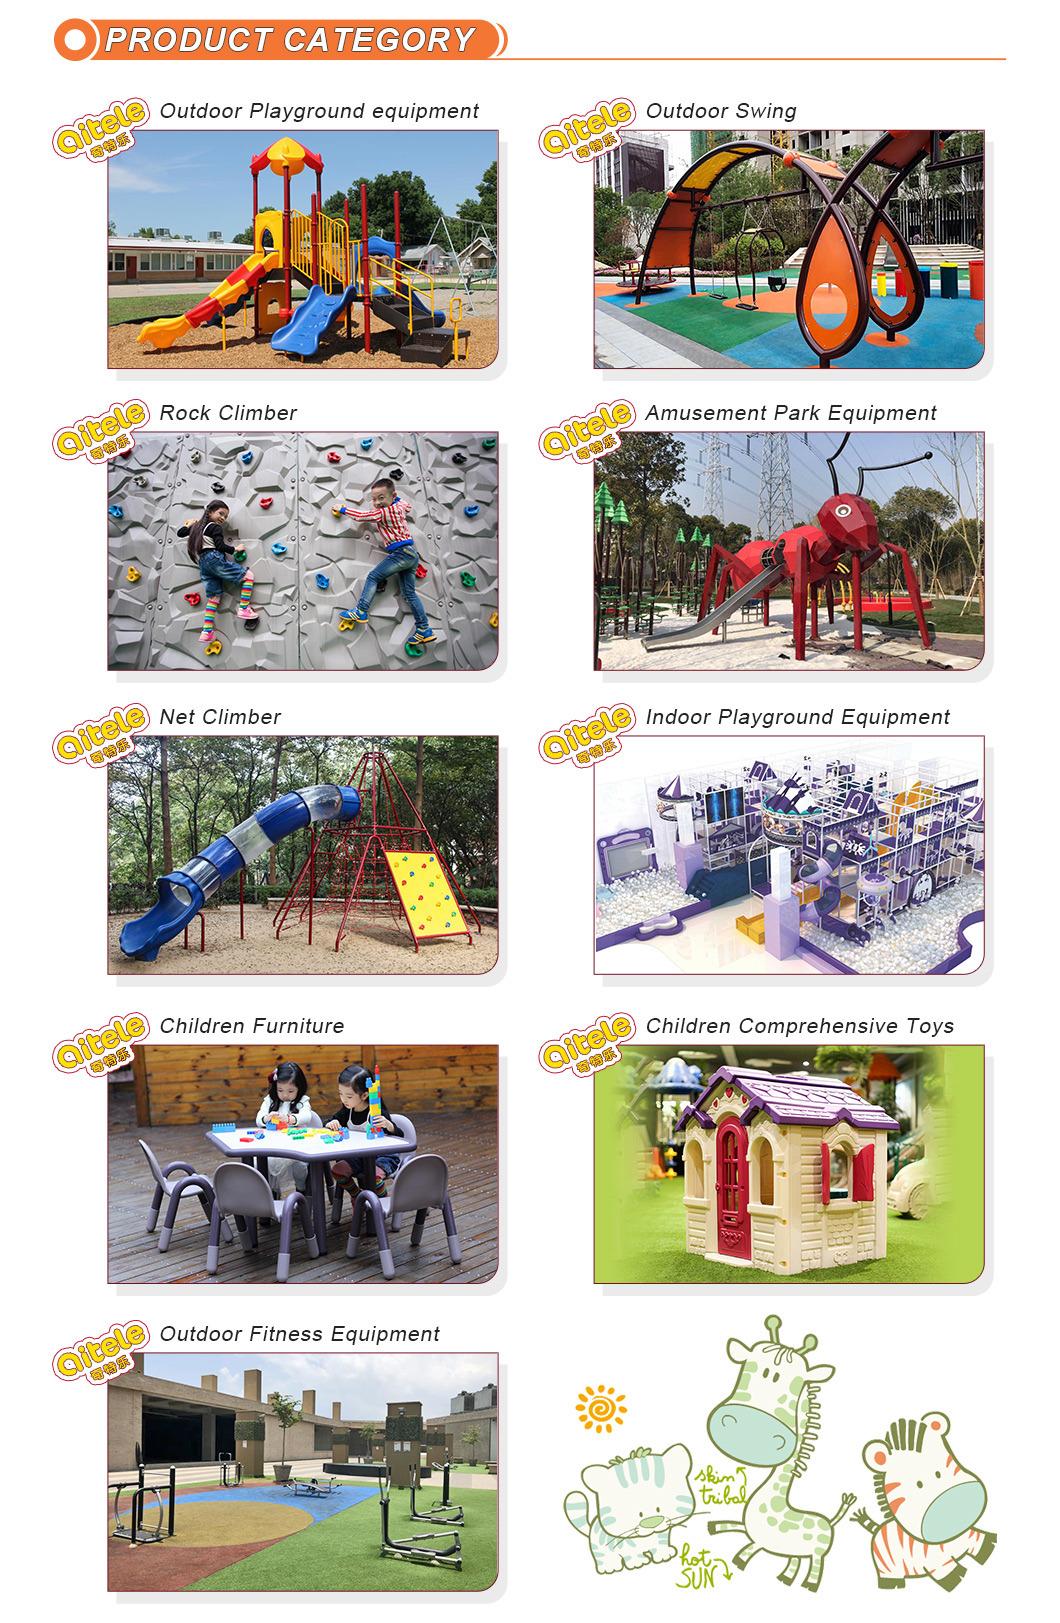 Outdoor Playground Equipment with Net Climber